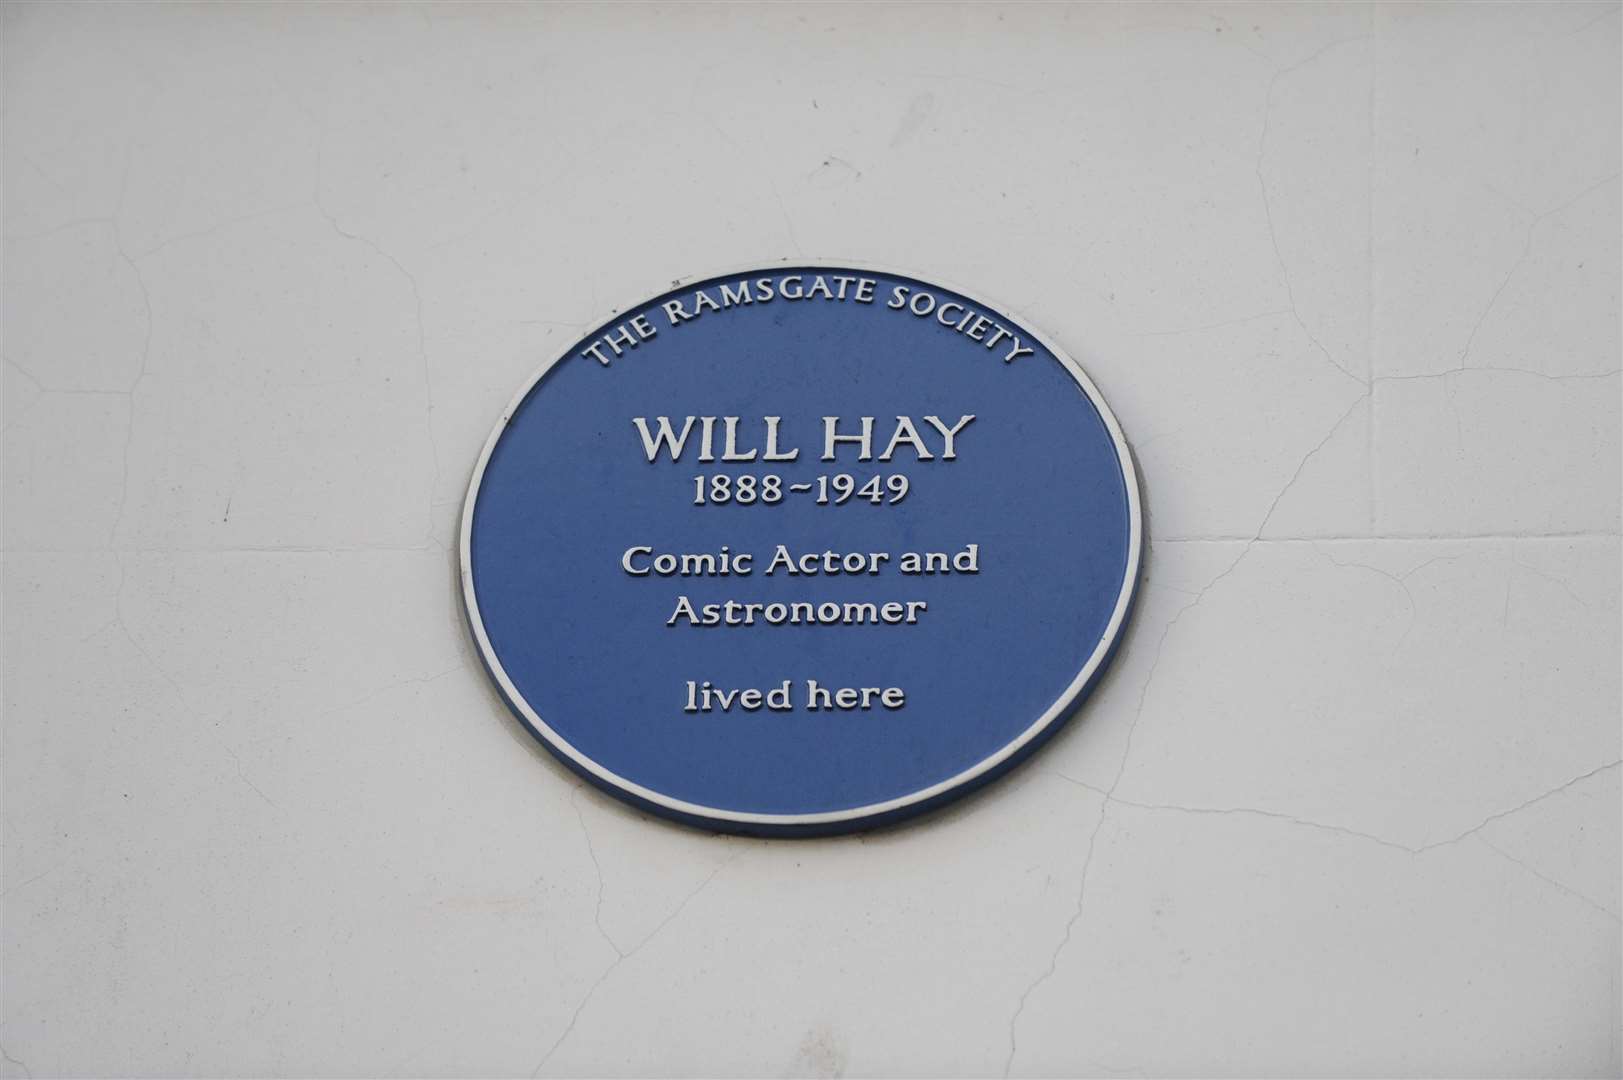 Will Hay's blue plaque, Guilford Lawn.Picture: Tony Flashman